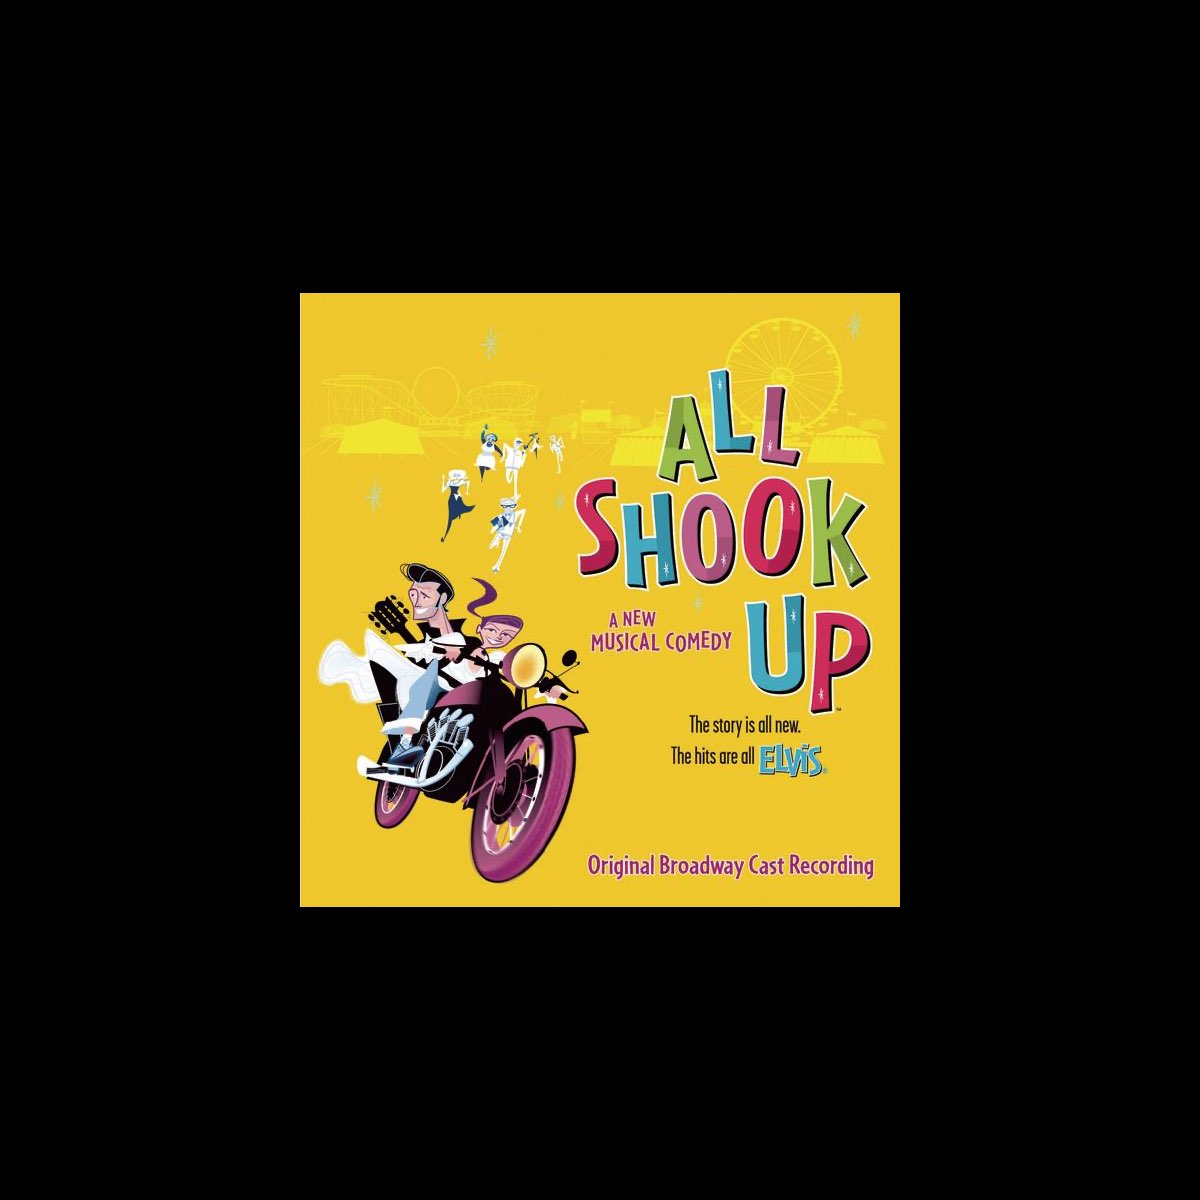 All Shook Up By Original Broadway Cast Of All Shook Up On Apple Music